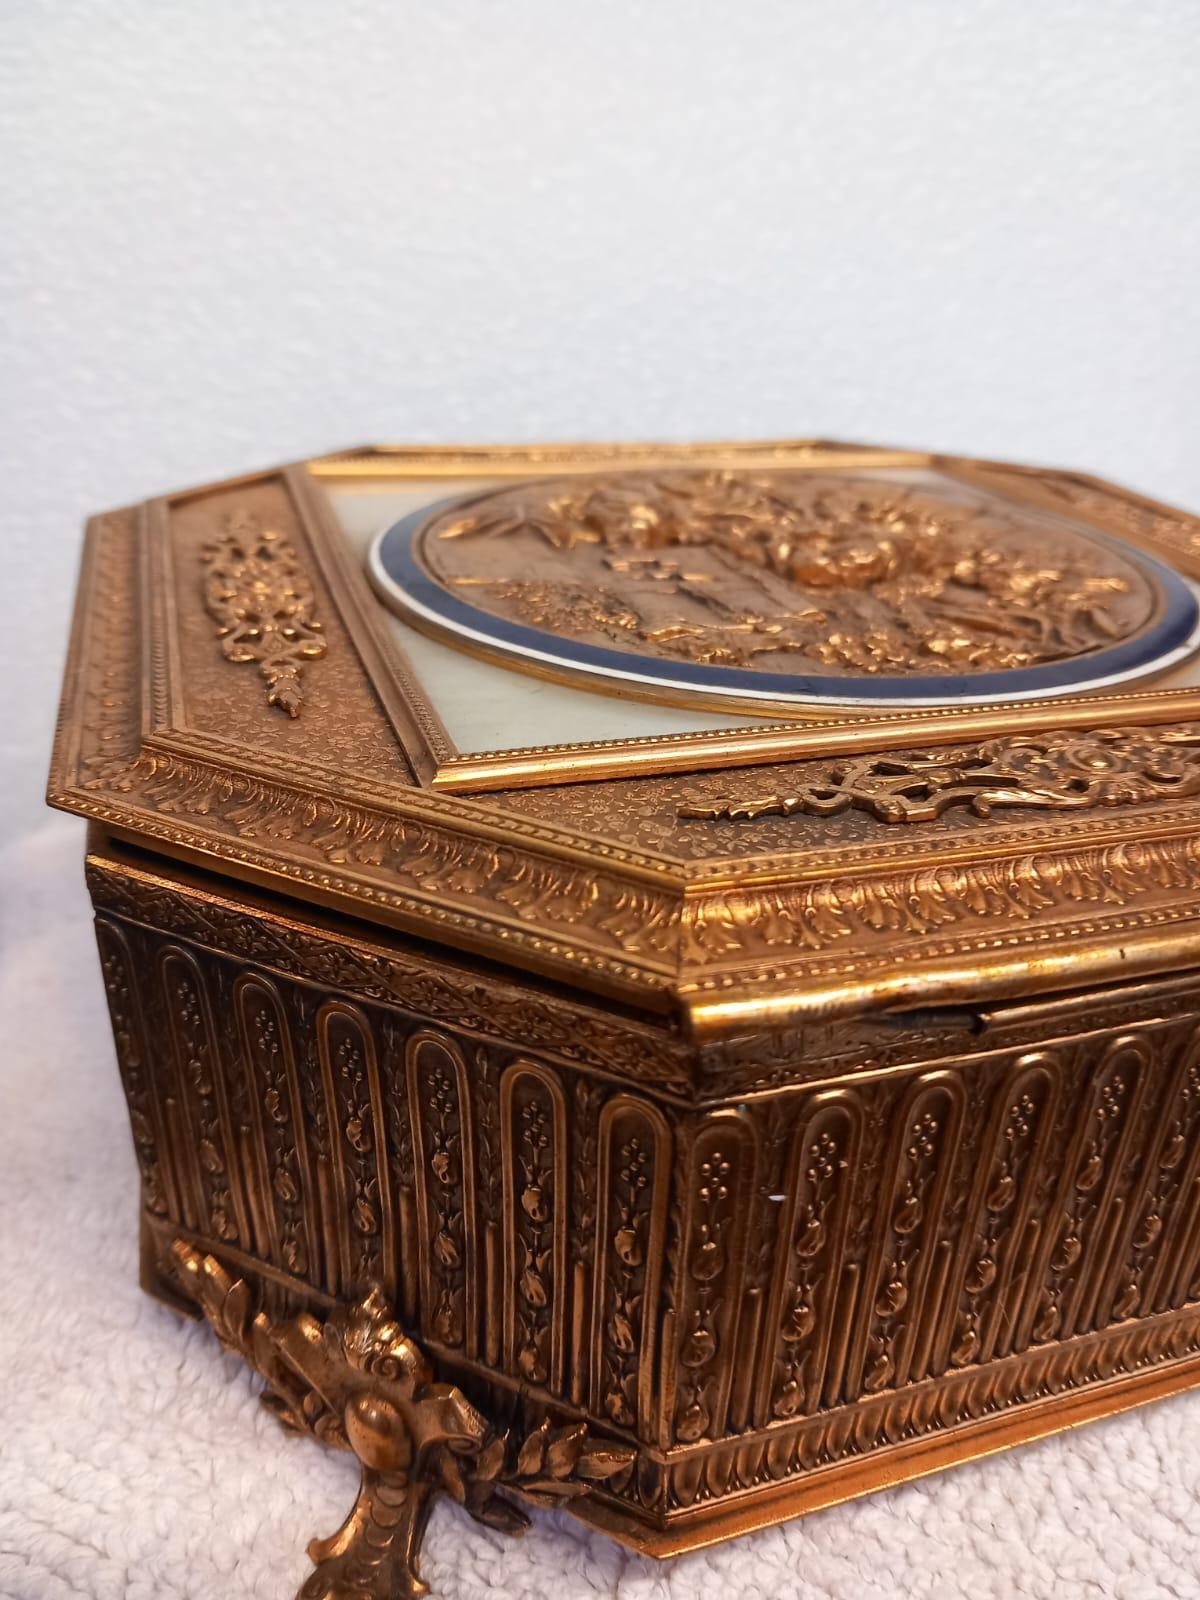 Palais Royal gilt bronze and mother of pearl jewellery casket or trinket box For Sale 6